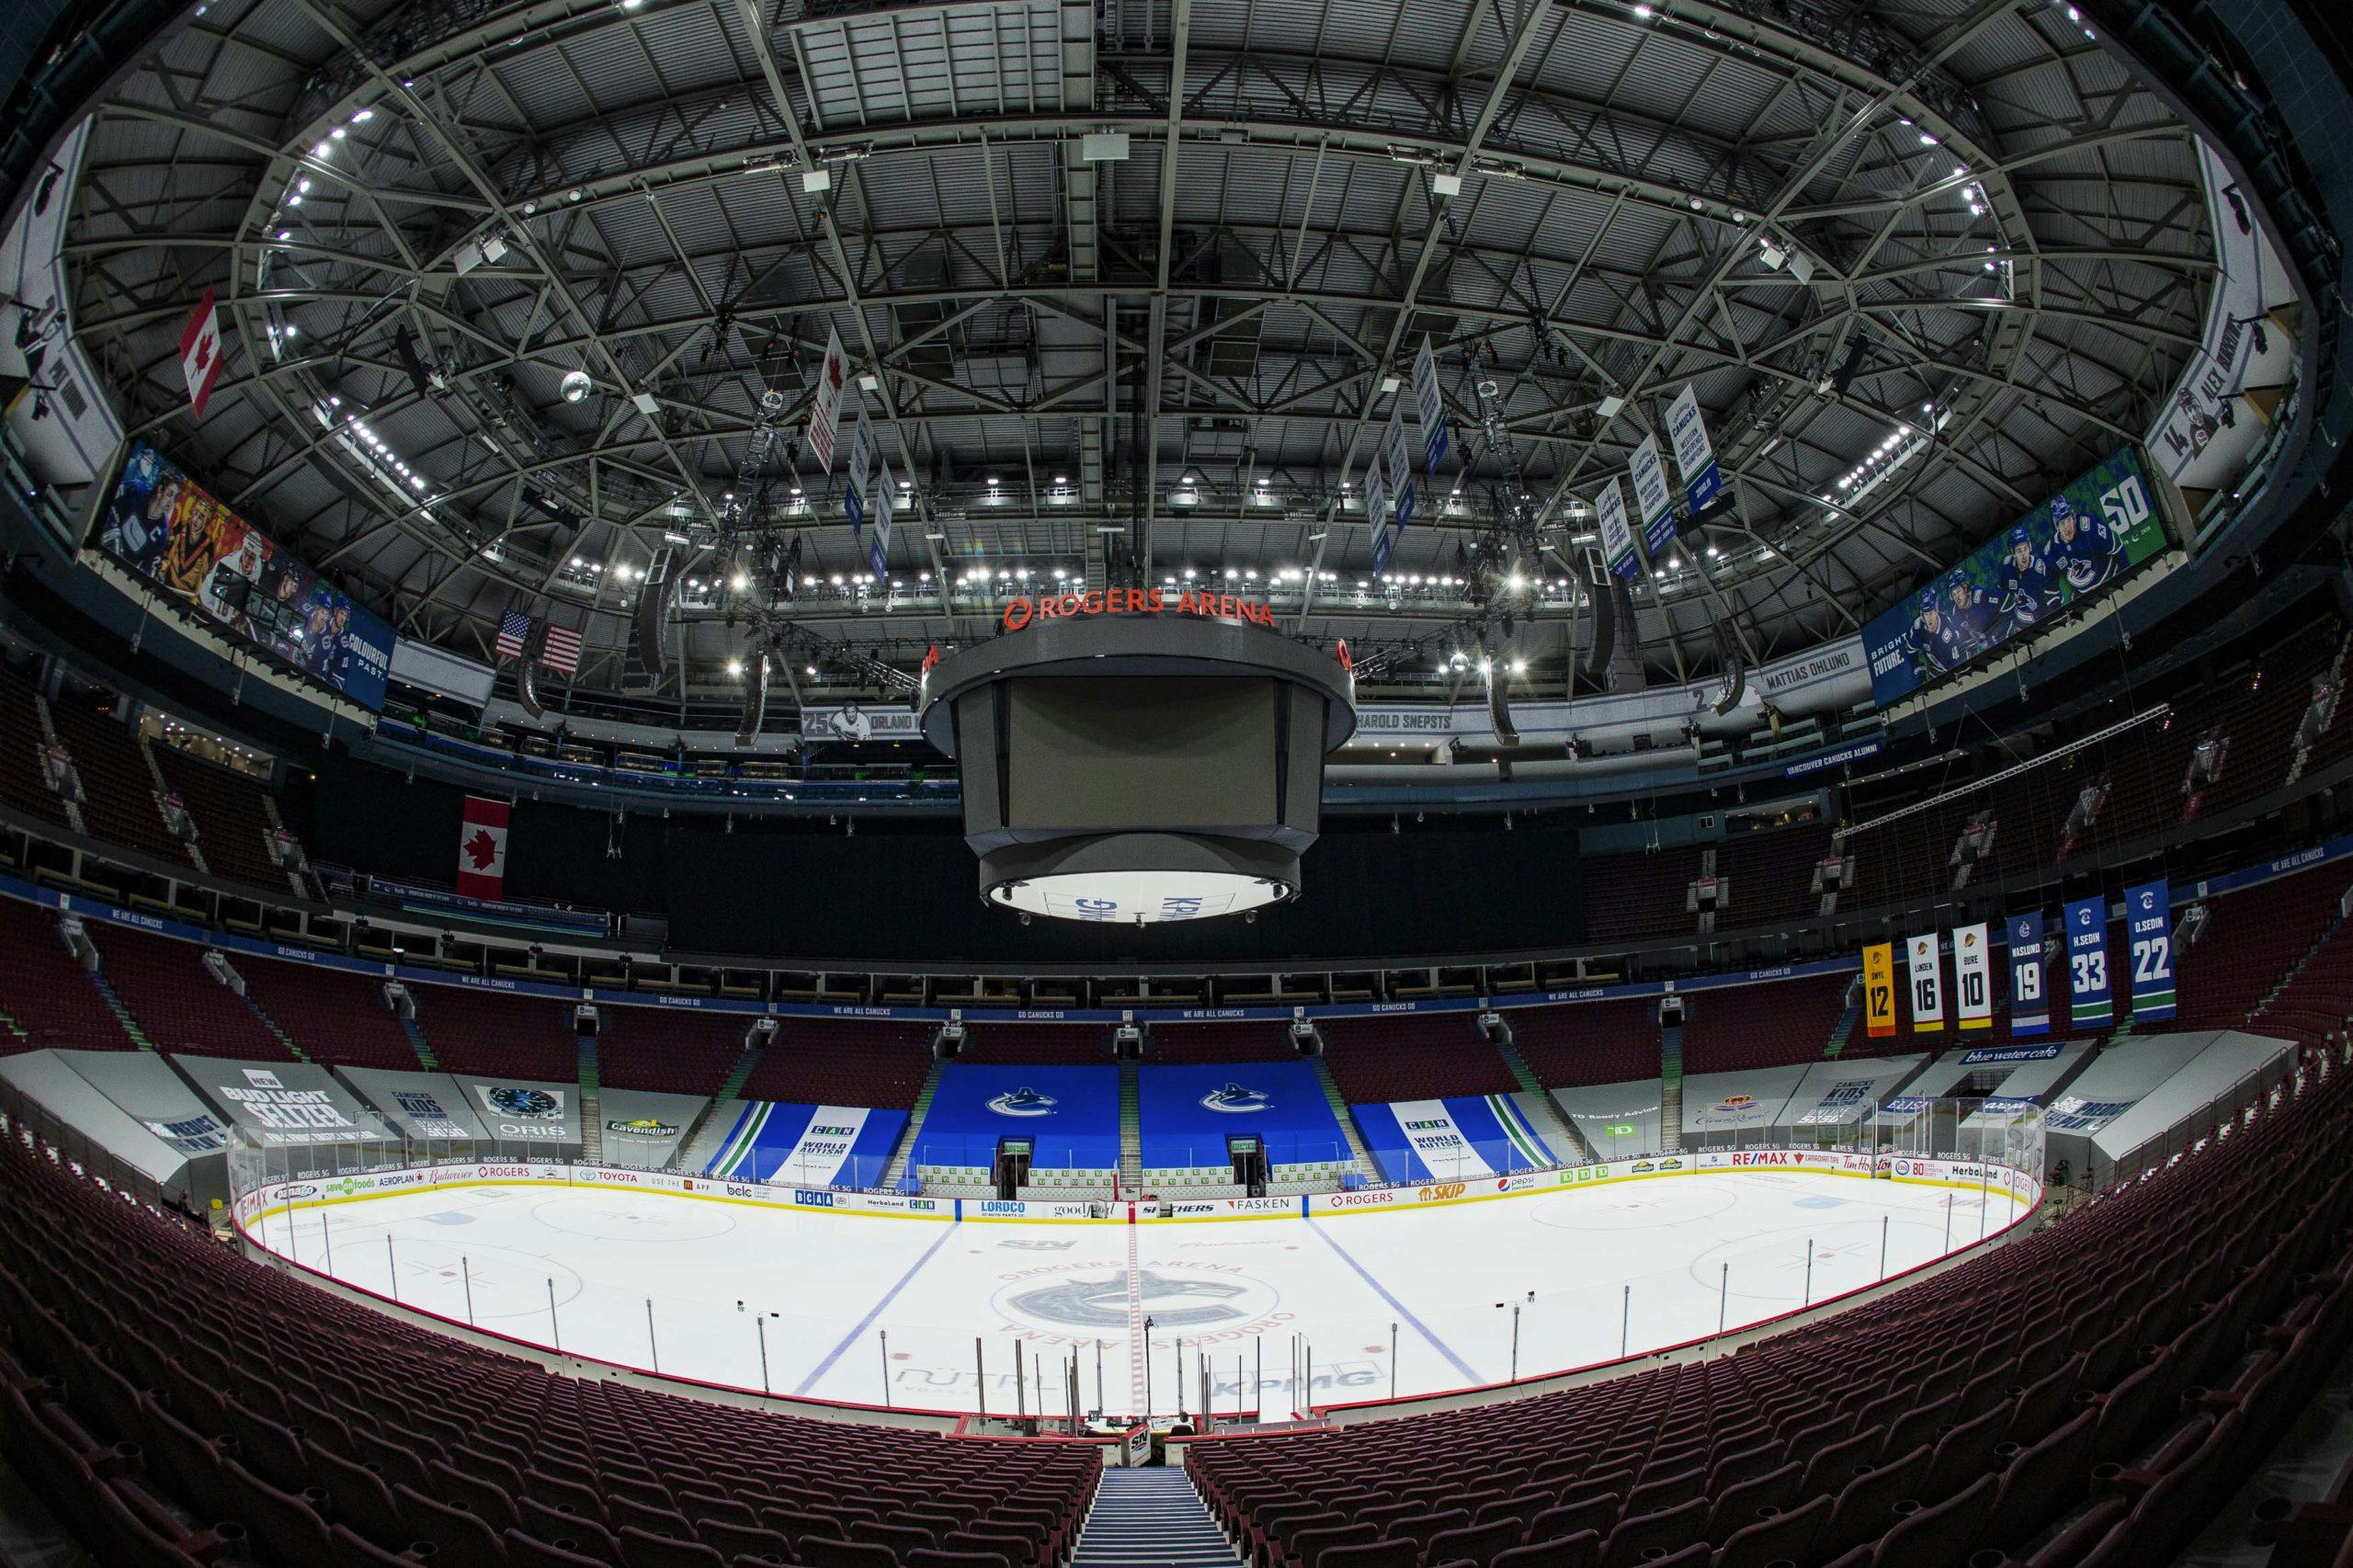 B.C. considering capacity limits at indoor events like Canucks games